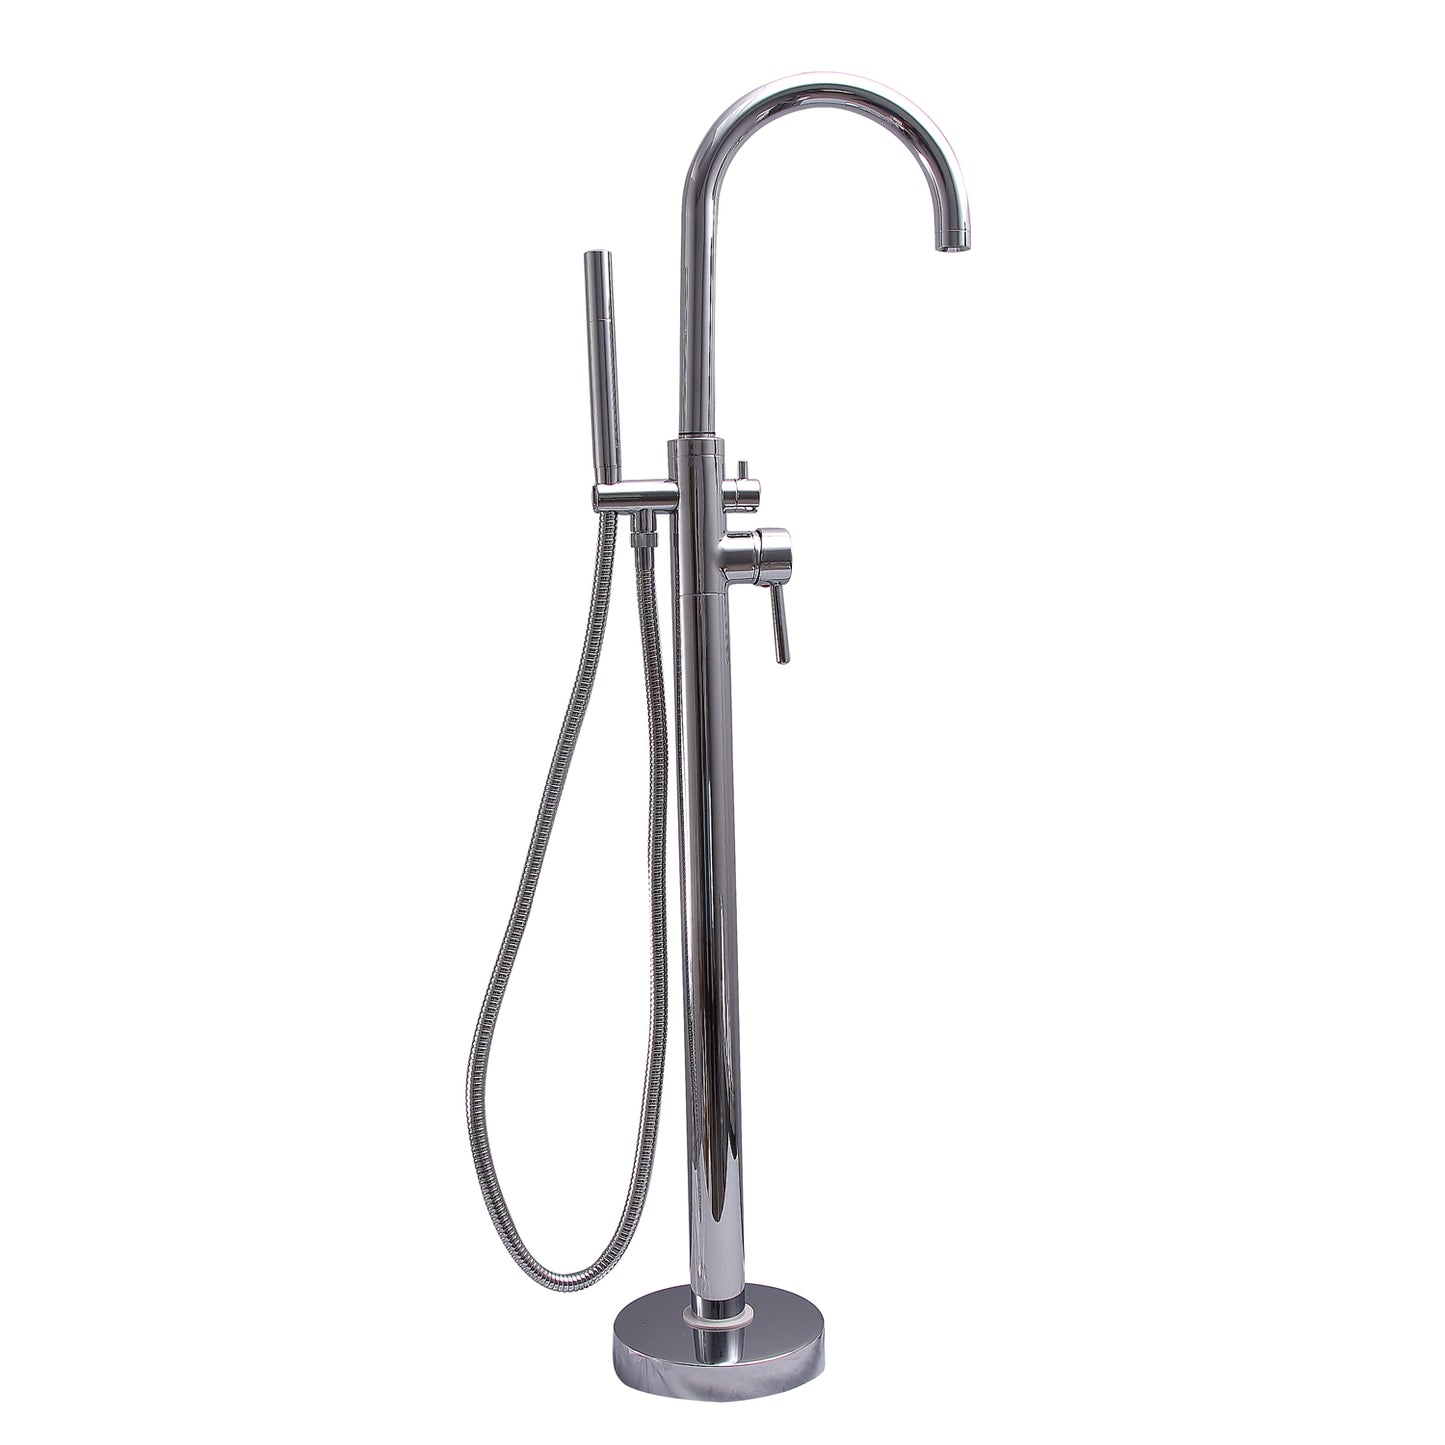 Belmore Floor-Mount Gooseneck Tub Faucet with Hand Shower in Chrome